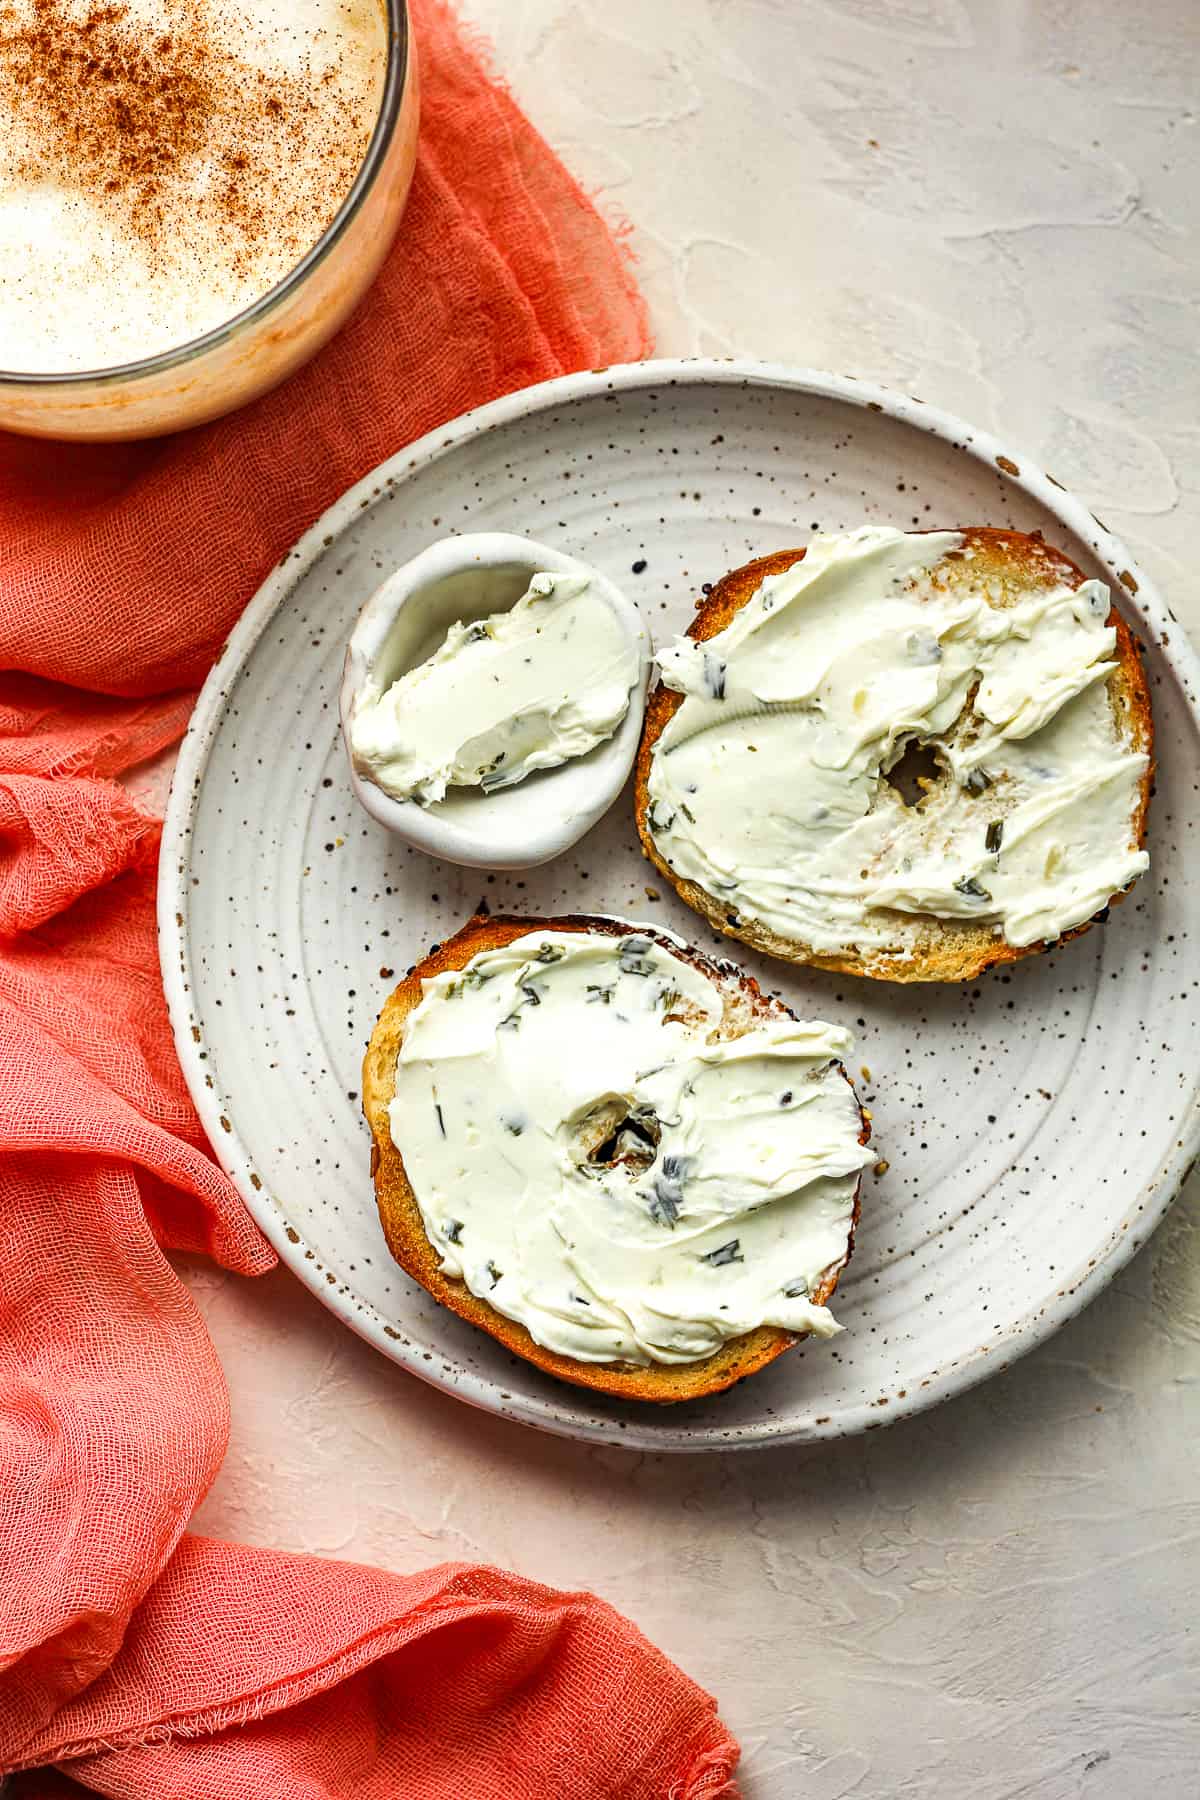 a toasted bagel with chive cream cheese.